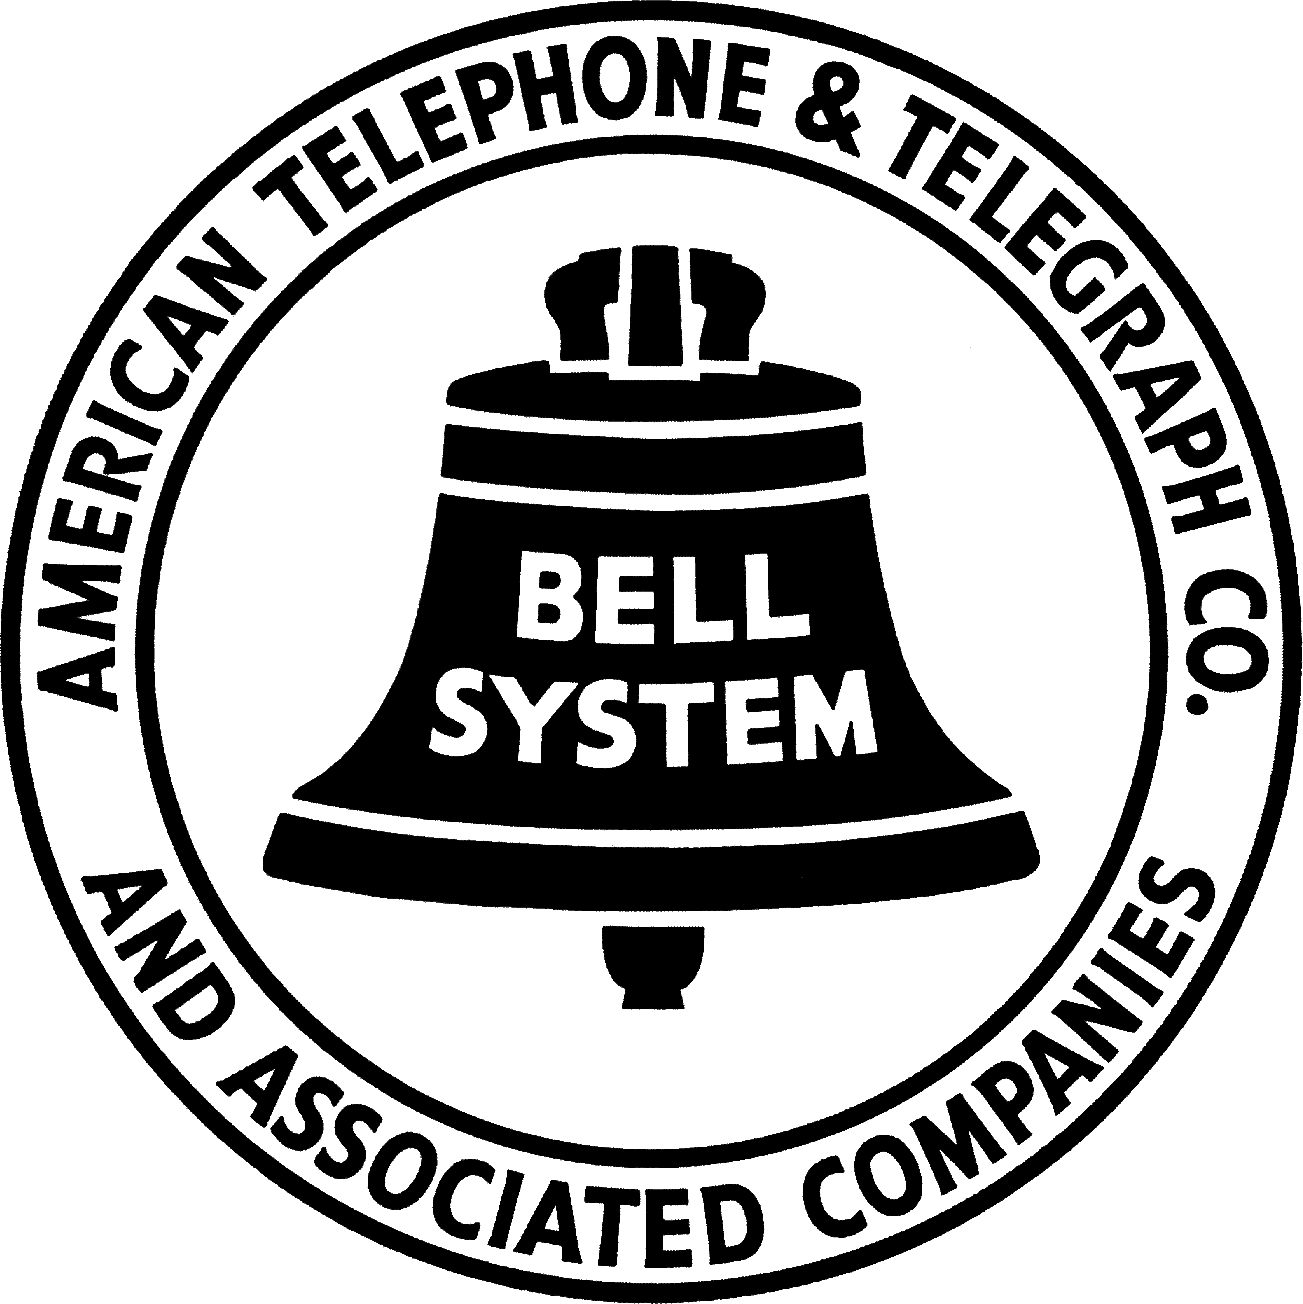 Telephone Company Logo - Bell Telephone Company | Bell System | Telephone, Belle, Old phone